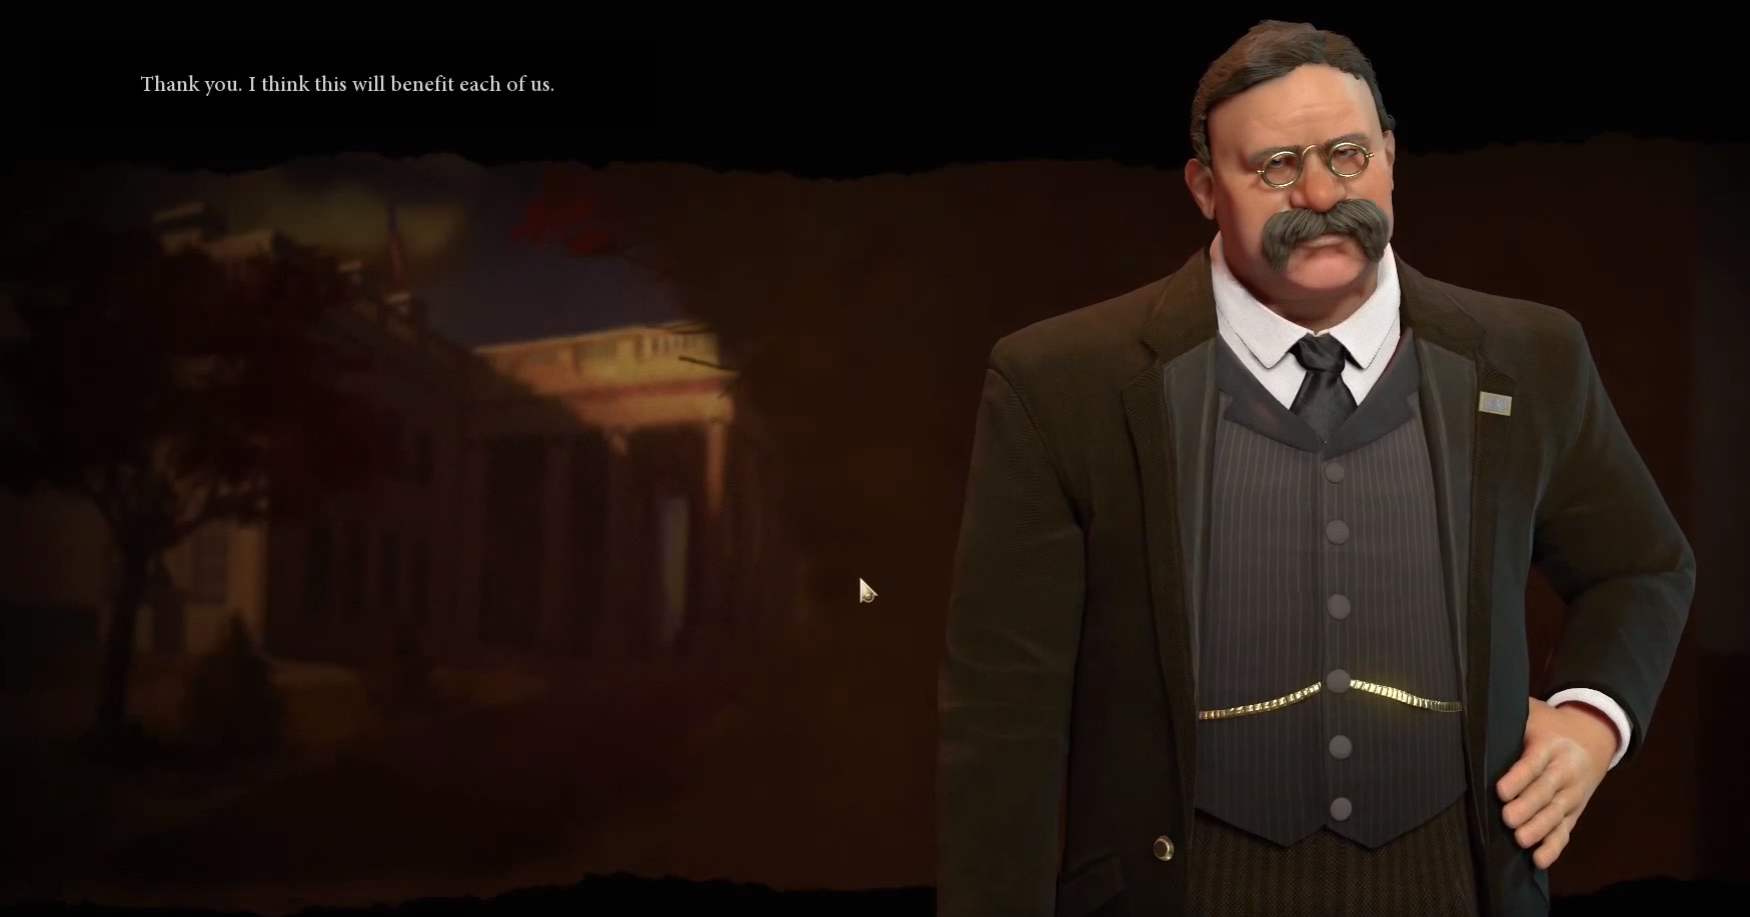 Civ 6 Leaders like Teddy Roosevelt Will Have Their Own Agendas